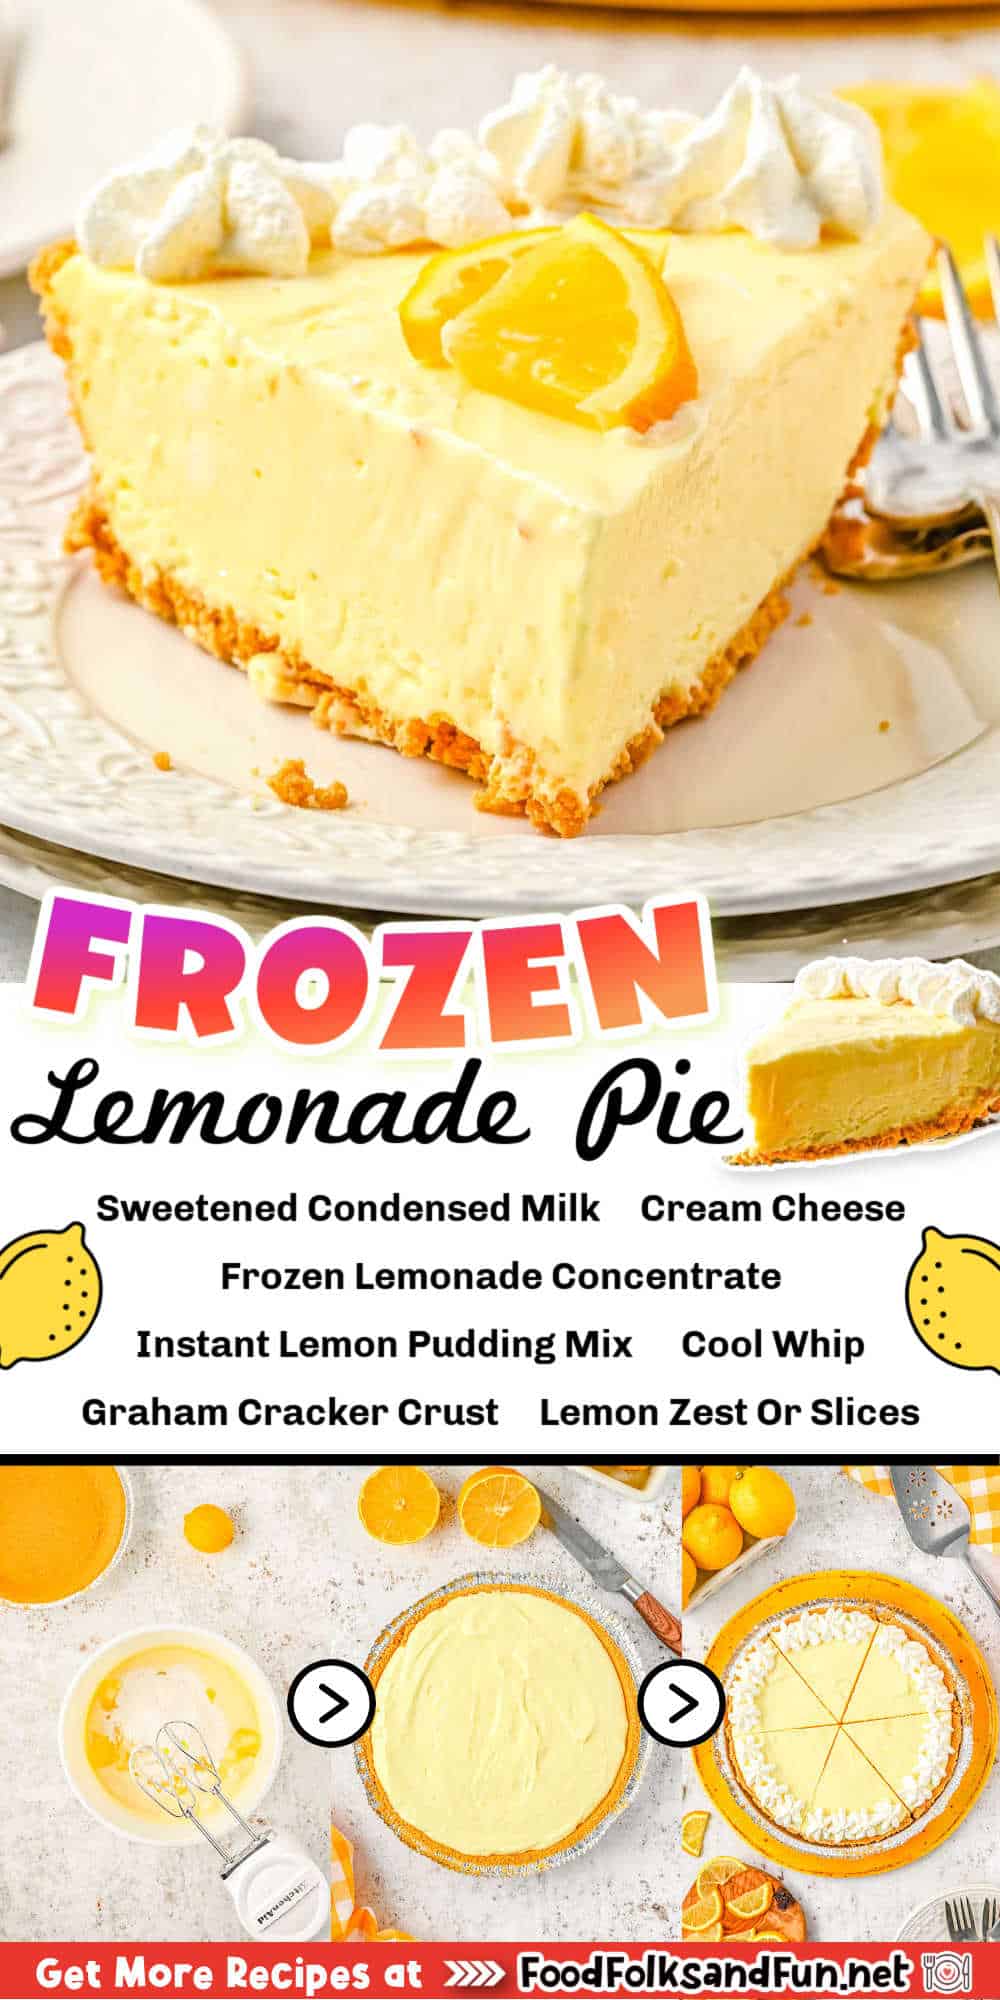 Indulge in a sweet, tangy, and creamy Frozen Lemonade Pie that’s quick and easy to make! Treat yourself to a delicious summer dessert. via @foodfolksandfun